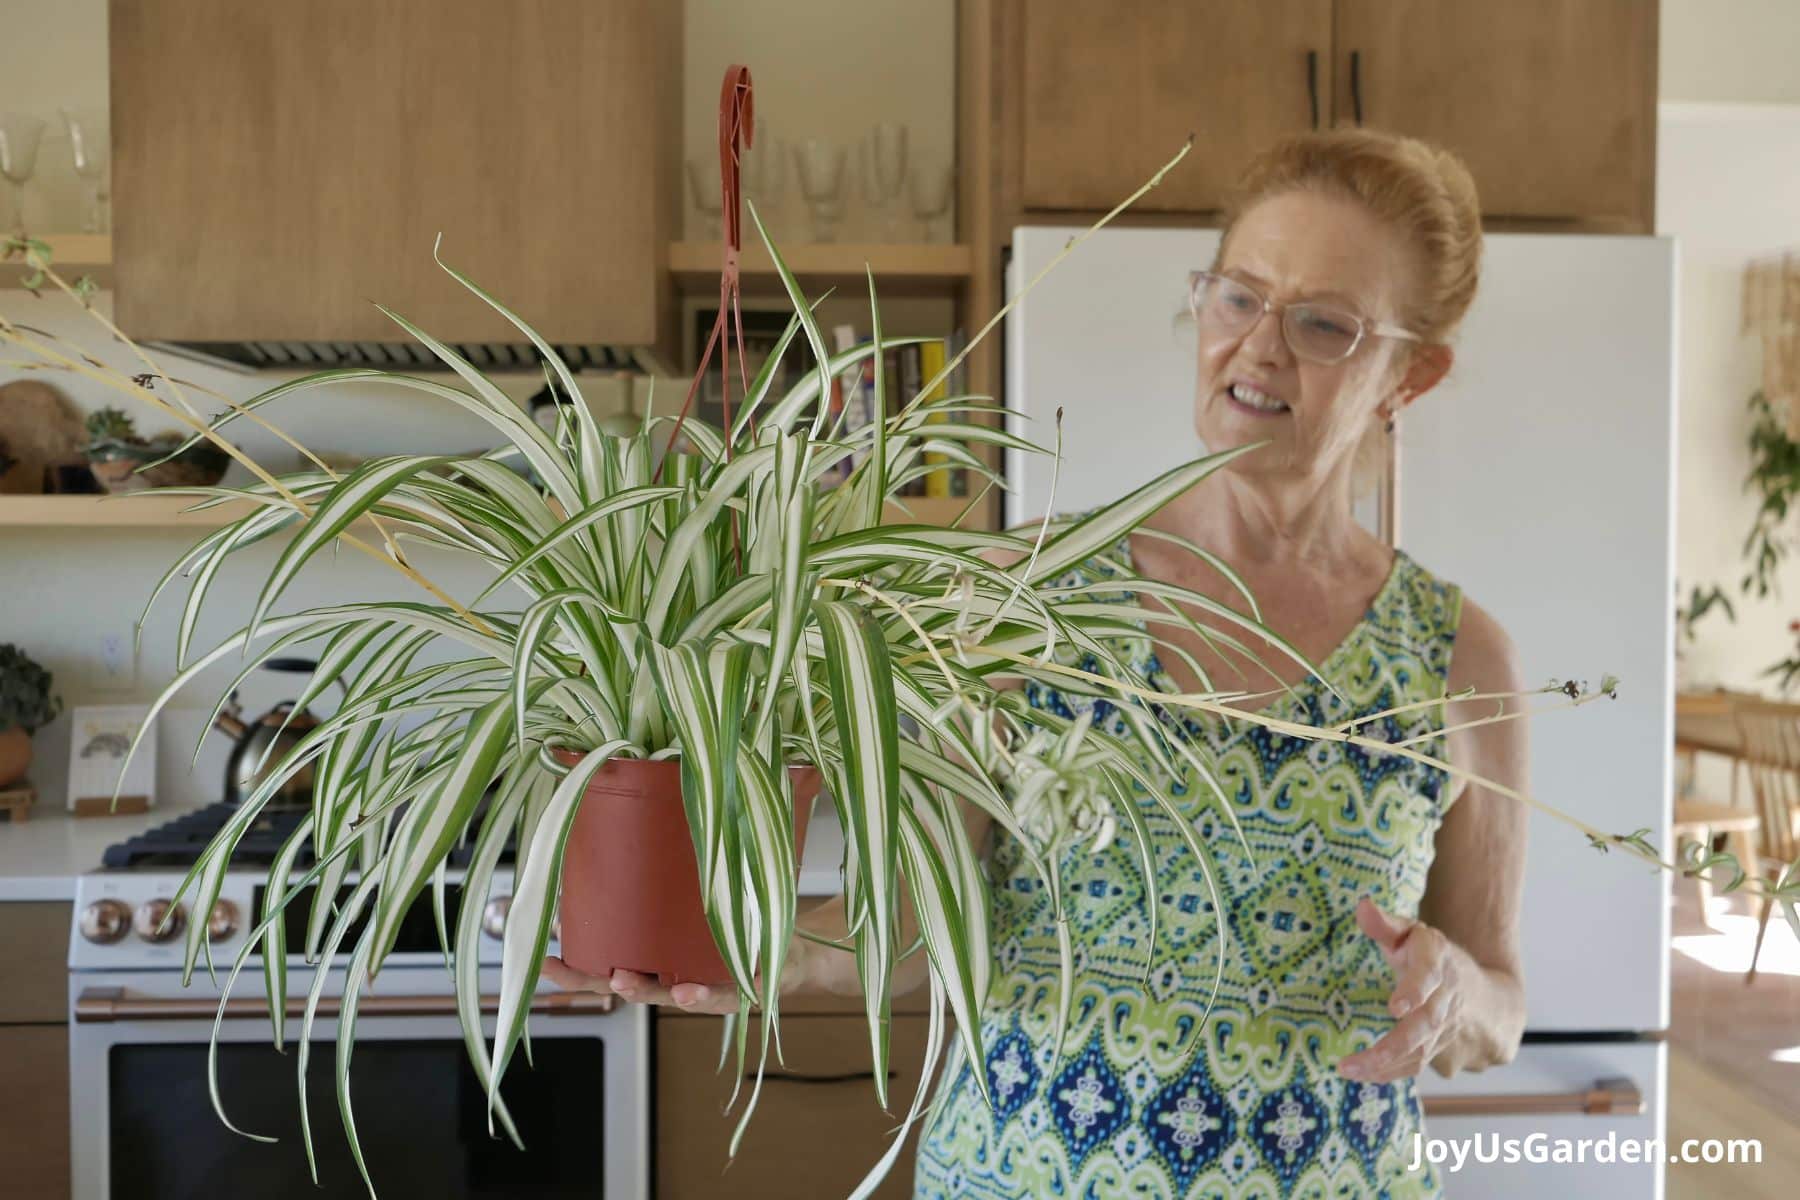 Nell foster stands in her kitchen holding a variegated spider plant.